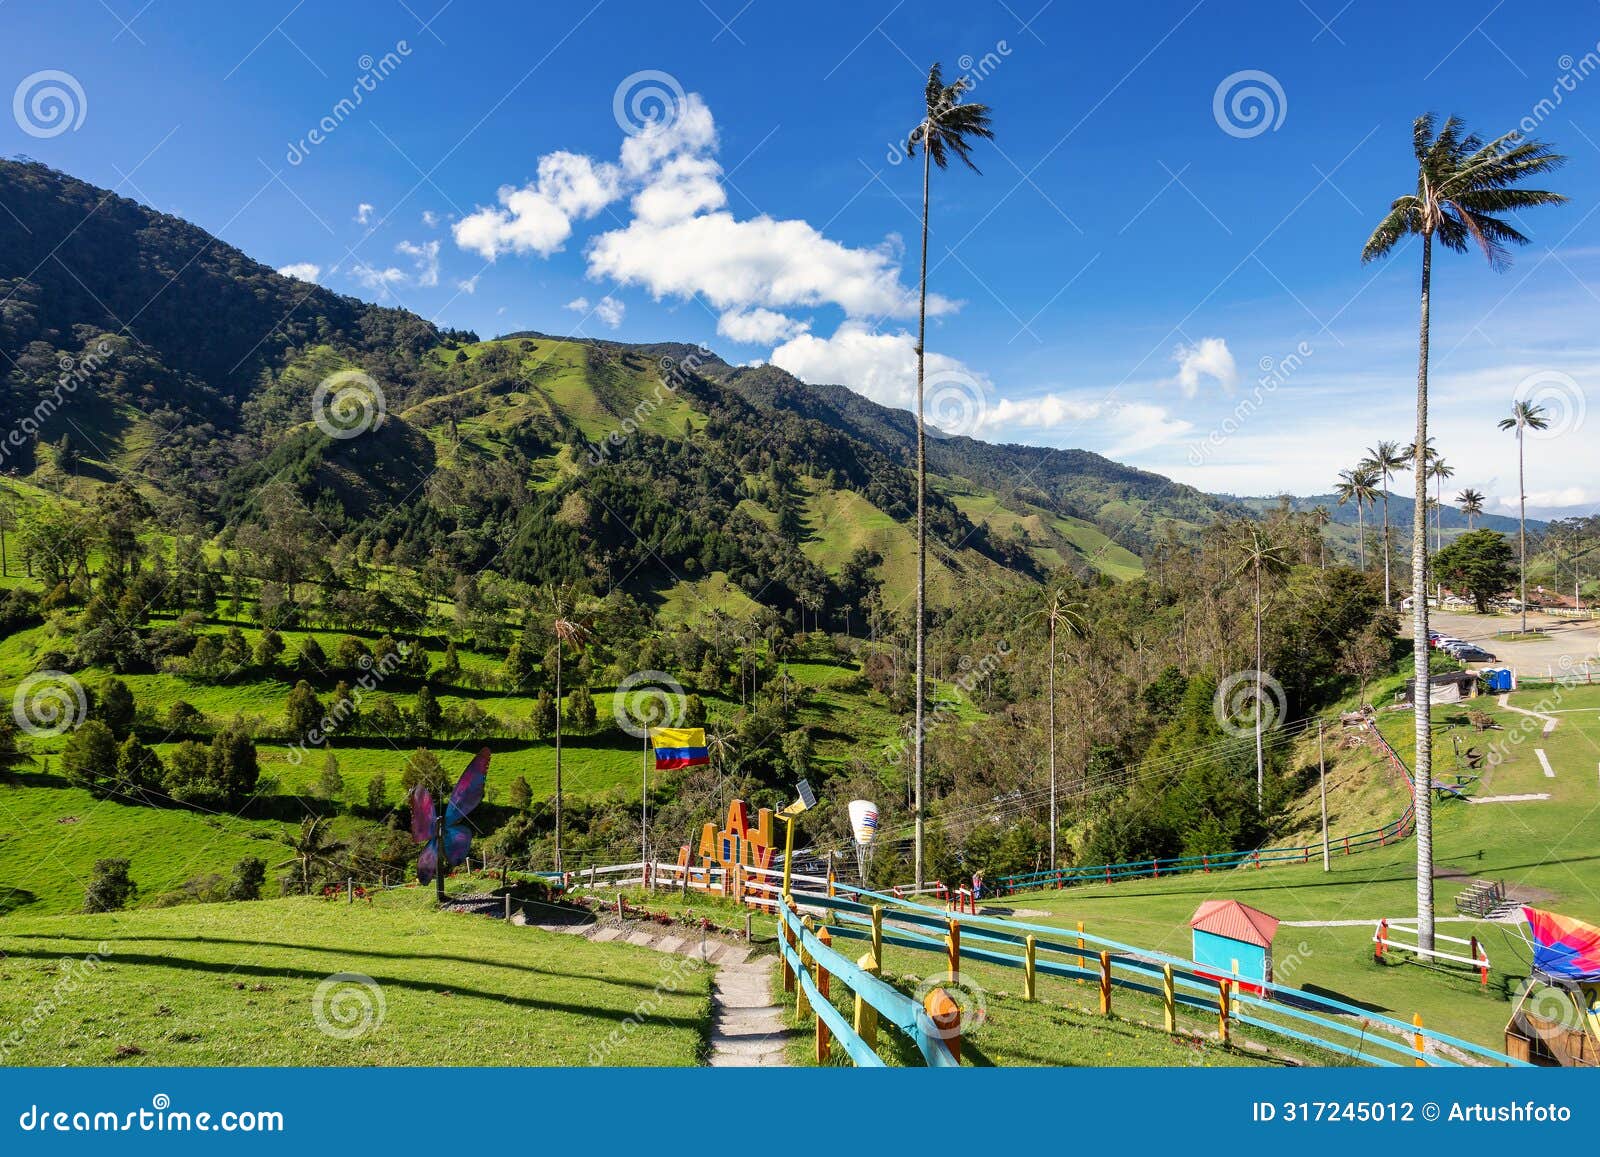 entertainment center in valle del cocora valley with tall wax palm trees. salento, quindio department. colombia